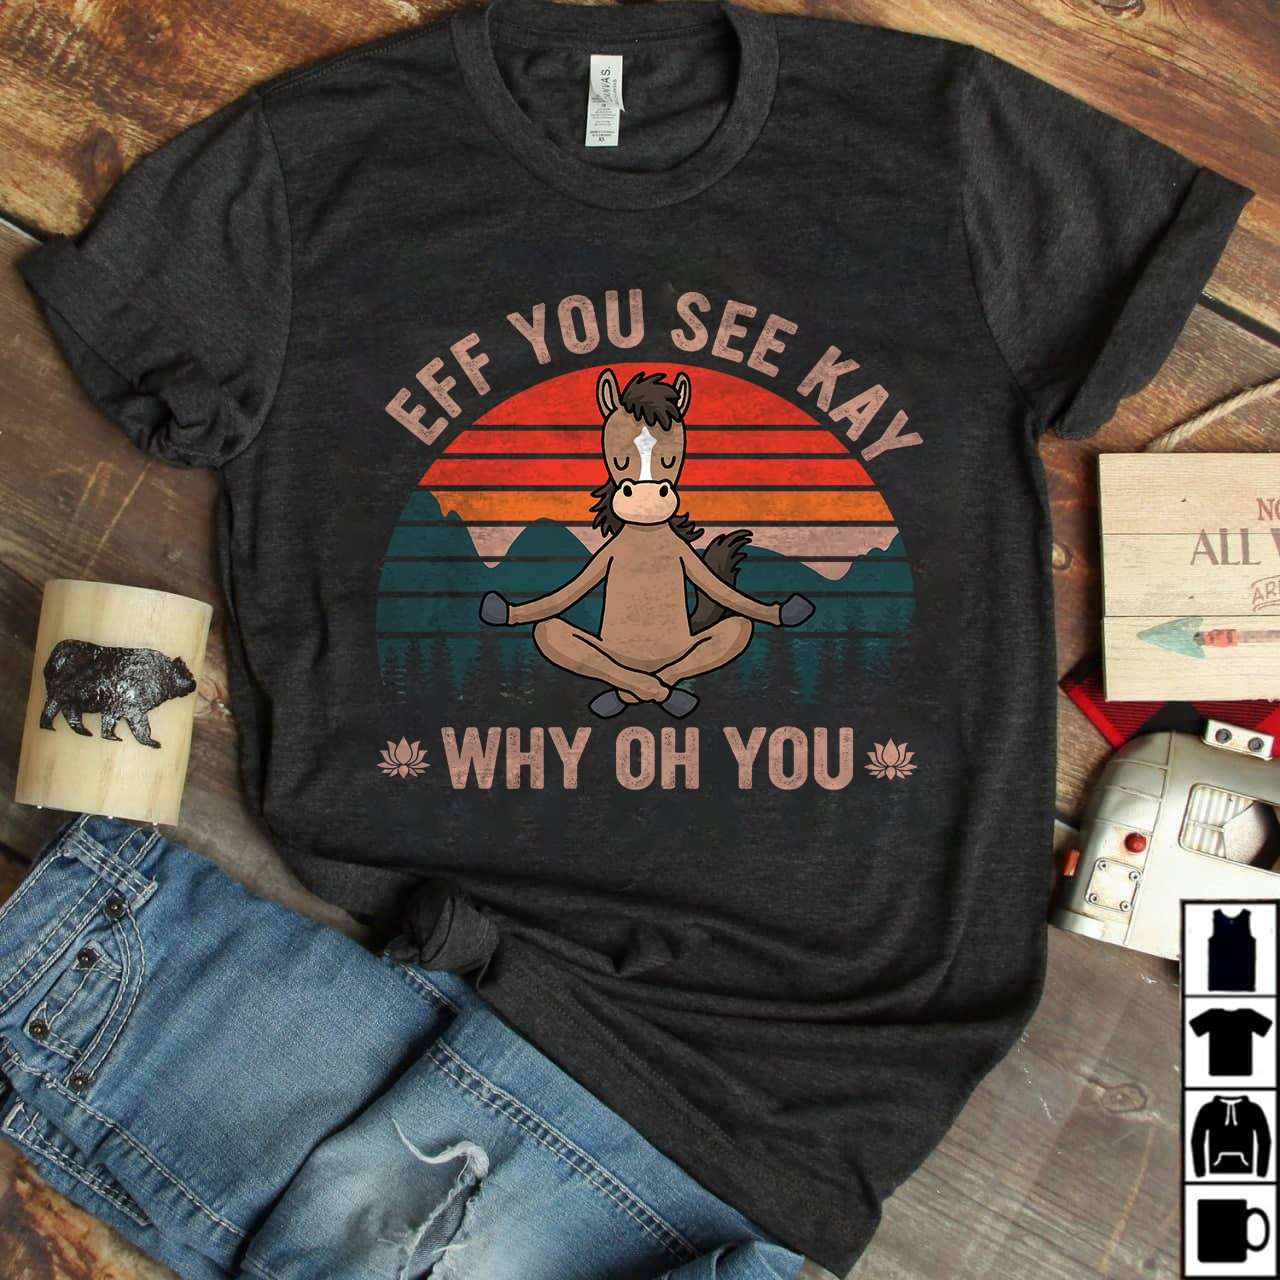 Eff you see kay, why oh you - T-shirt for horse lover, doing yoga horse